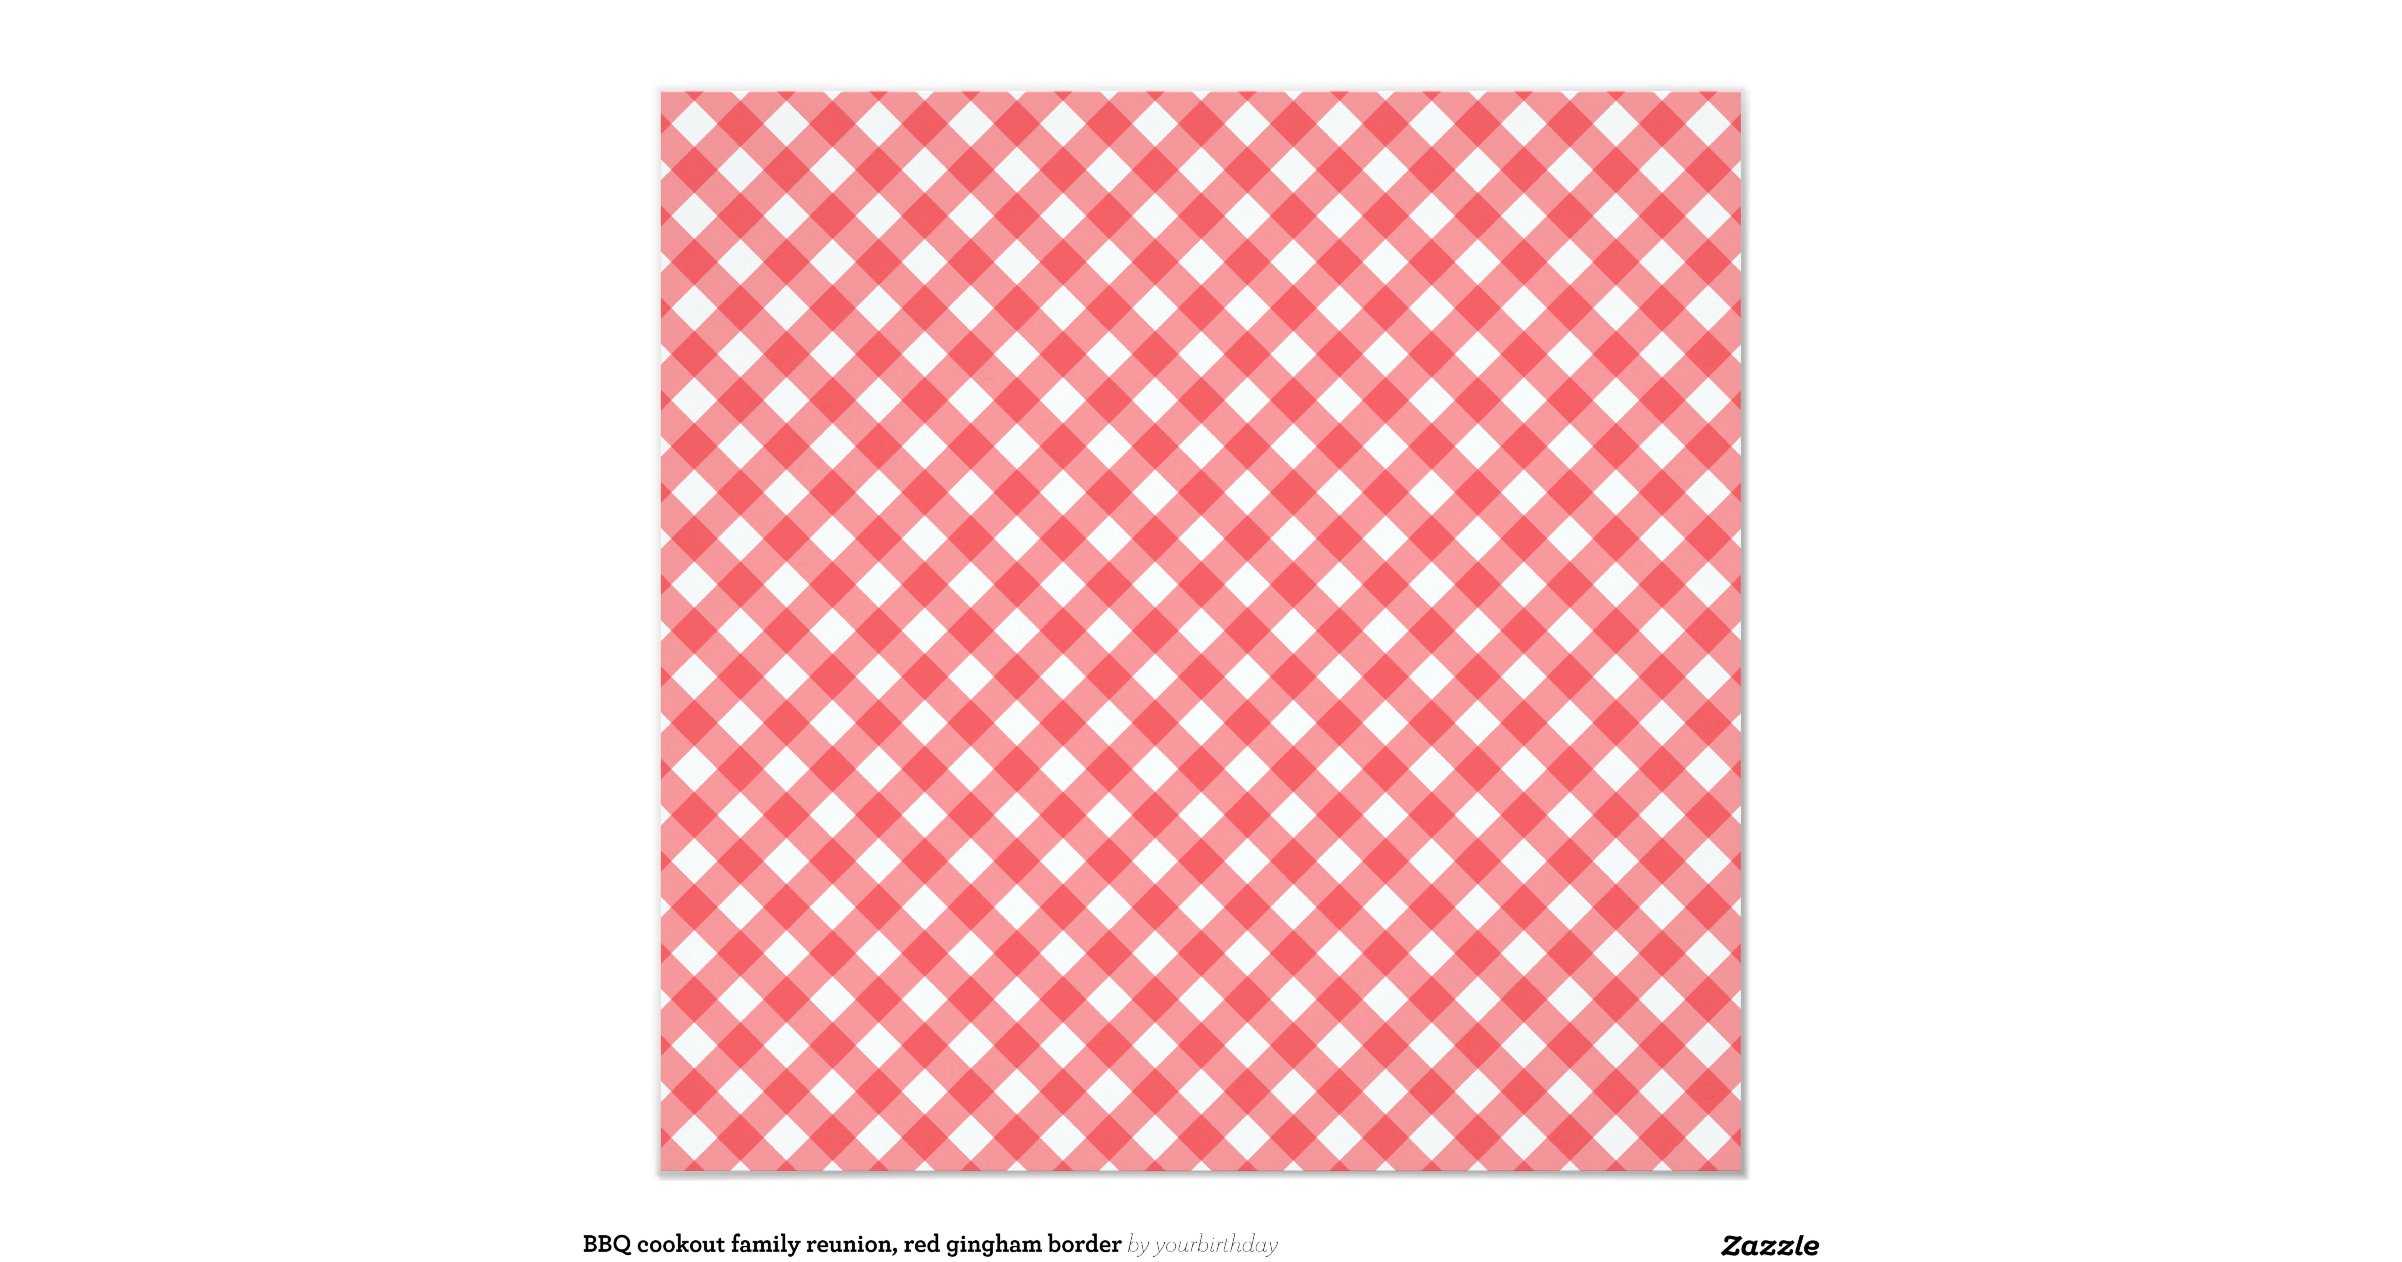 bbq_cookout_family_reunion_red_gingham_border_invitation ...